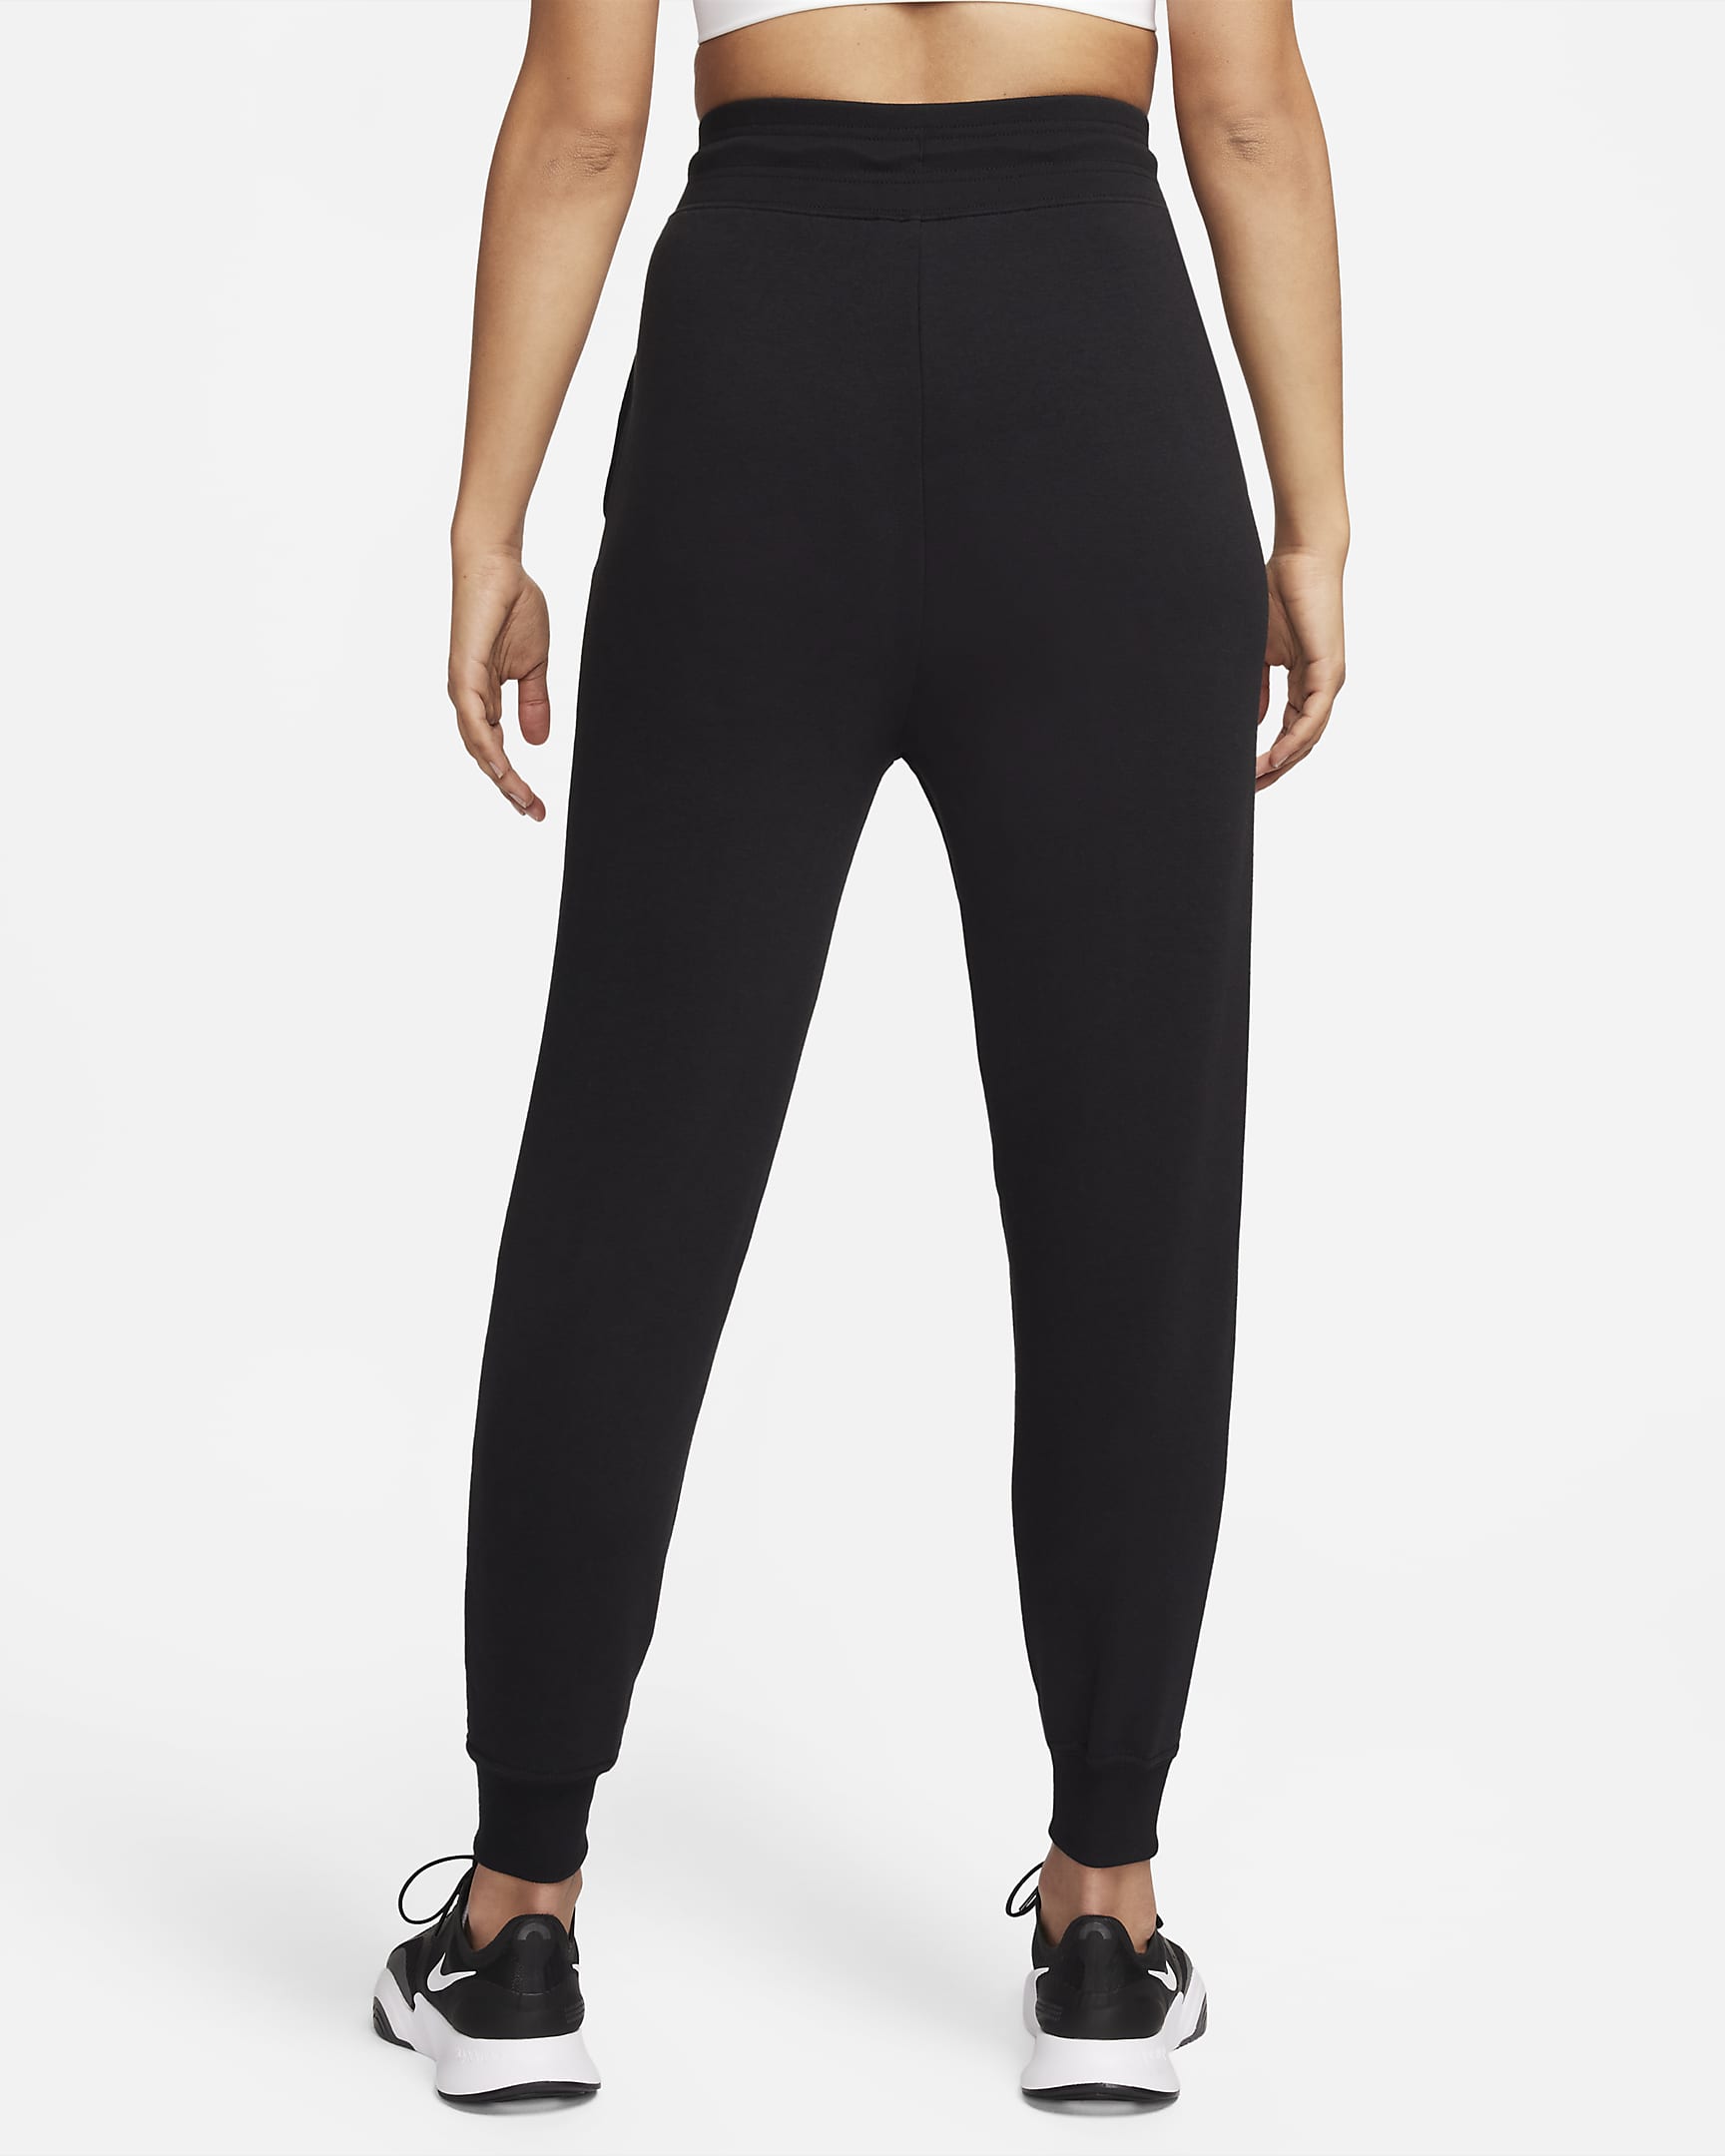 Women's High-Waisted 7/8 French Terry Joggers - FB5434